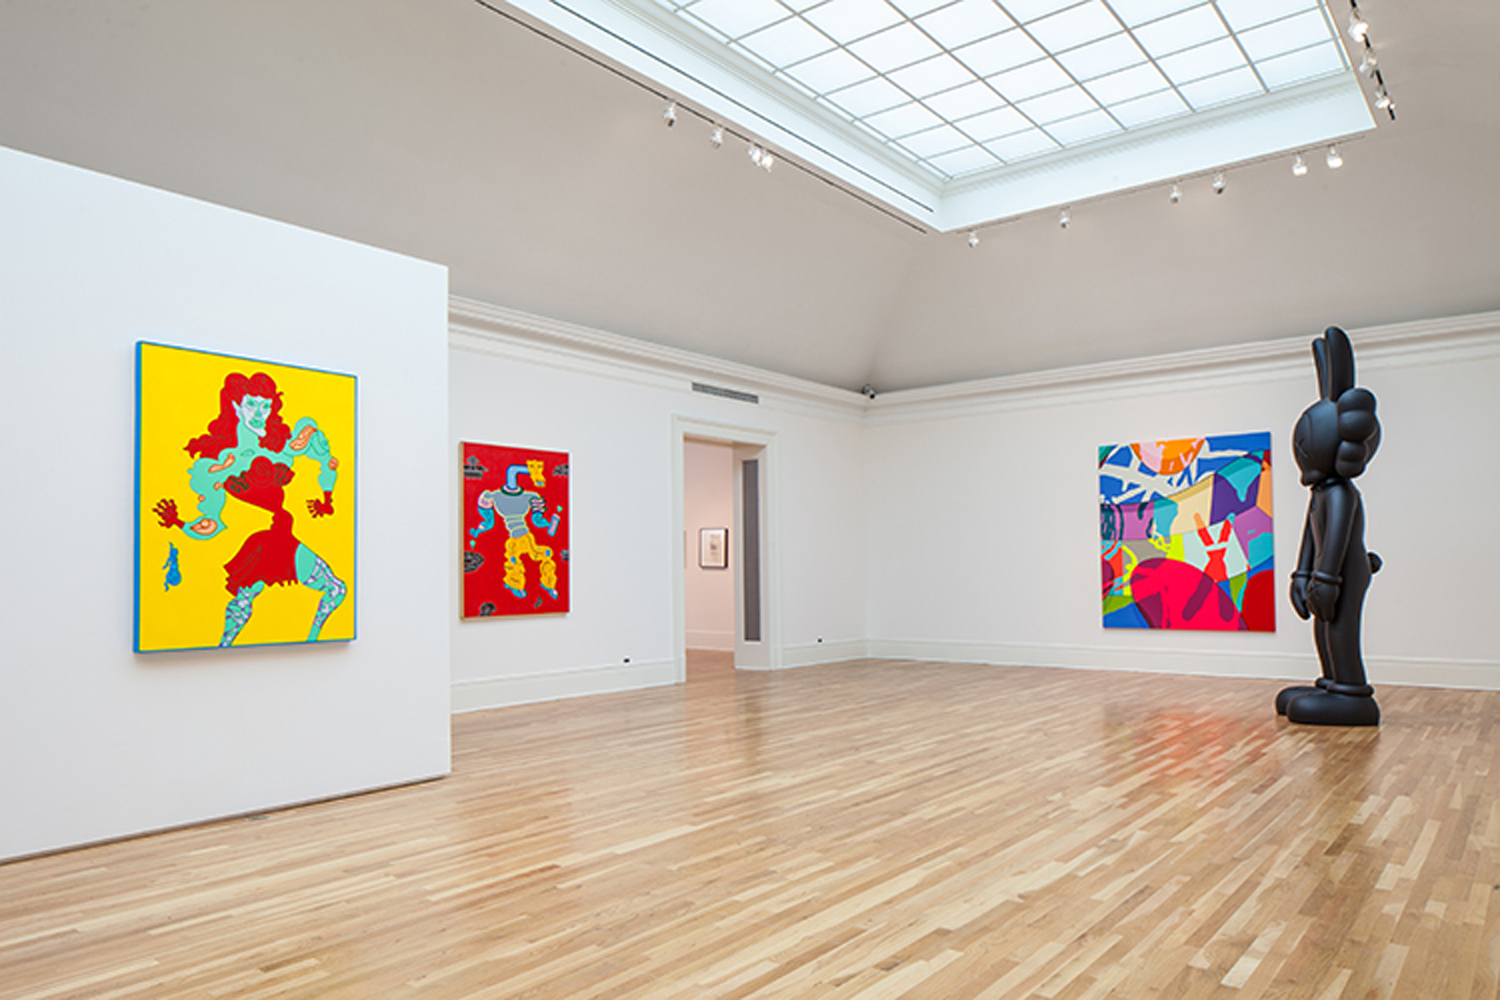 KAWS at the Newcomb Art Museum